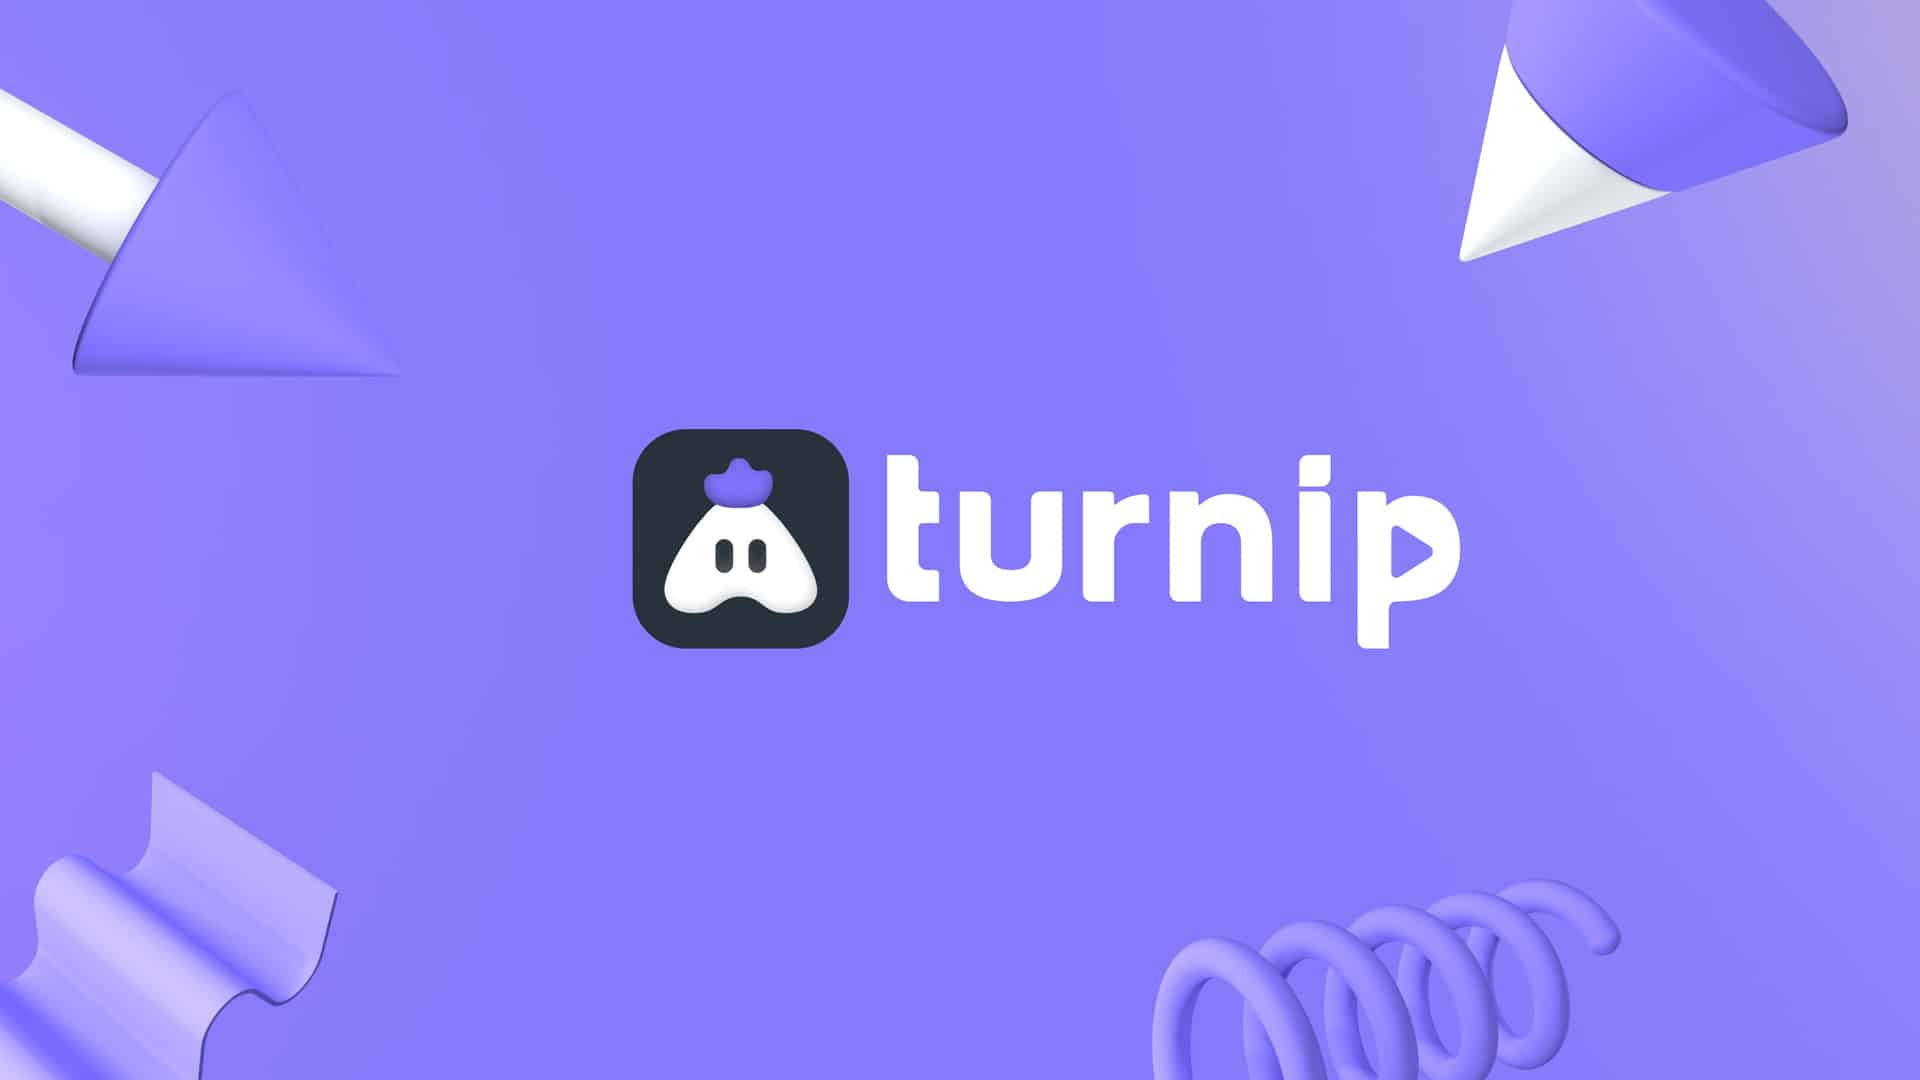 Gaming app Turnip gets USD 1.63 mn from Elevation Capital, others